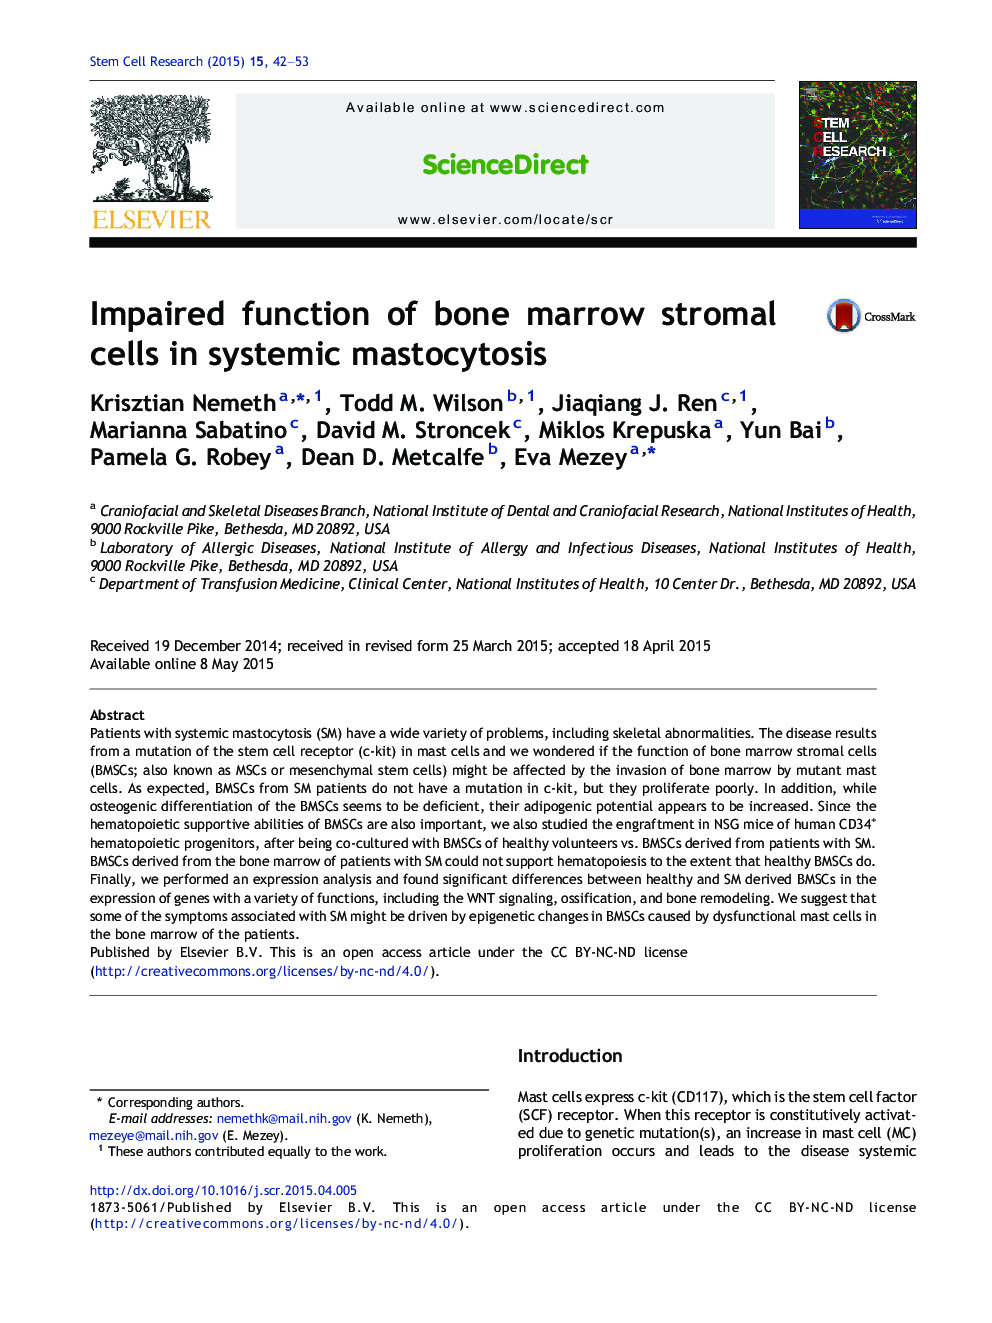 Impaired function of bone marrow stromal cells in systemic mastocytosis